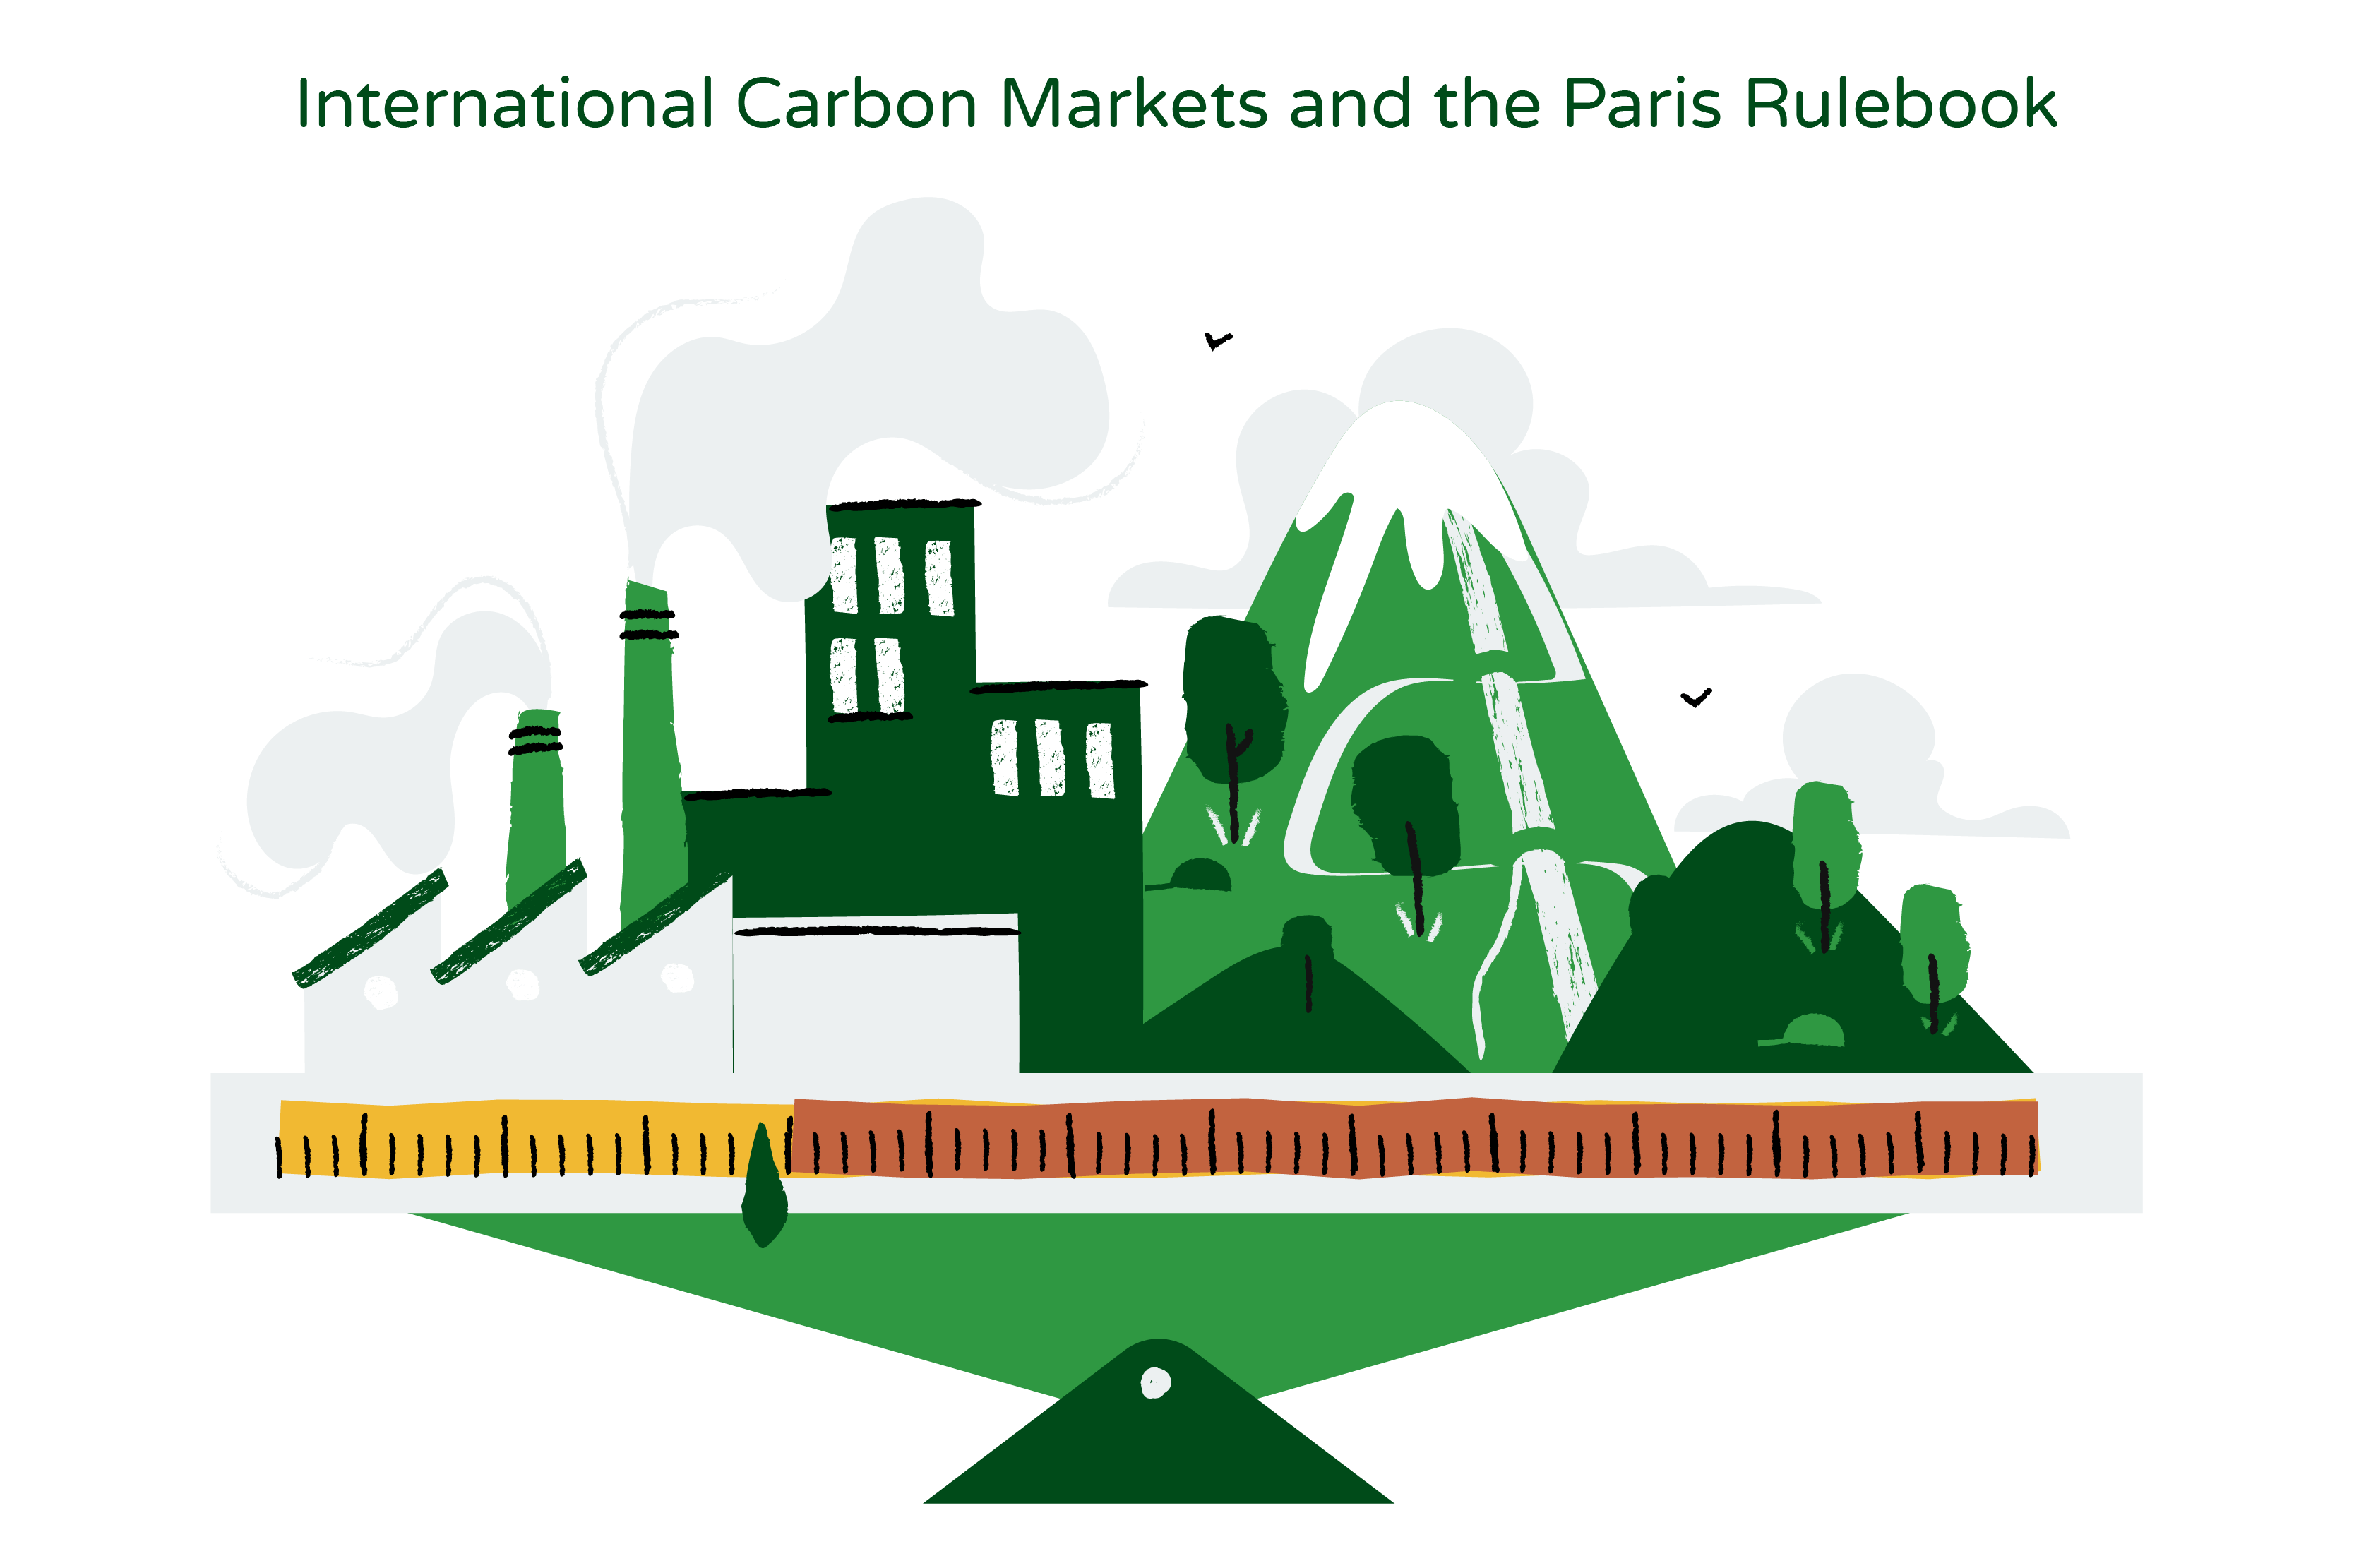 Image titled 'International Carbon Markets and the Paris Rulebook.' The image features a flat scale, with one side representing a sustainable environment, including Earth, industries, and mountains. The scale symbolizes the concept of international carbon markets and the Paris Rulebook.  The illustration visually conveys the connection between international carbon markets and the regulations outlined in the Paris Rulebook. It suggests the importance of achieving a balance between economic activities, represented by industries, and environmental sustainability, depicted through the natural elements.  Overall, the image represents the role of international carbon markets in promoting climate action and implementing the guidelines established in the Paris Agreement.